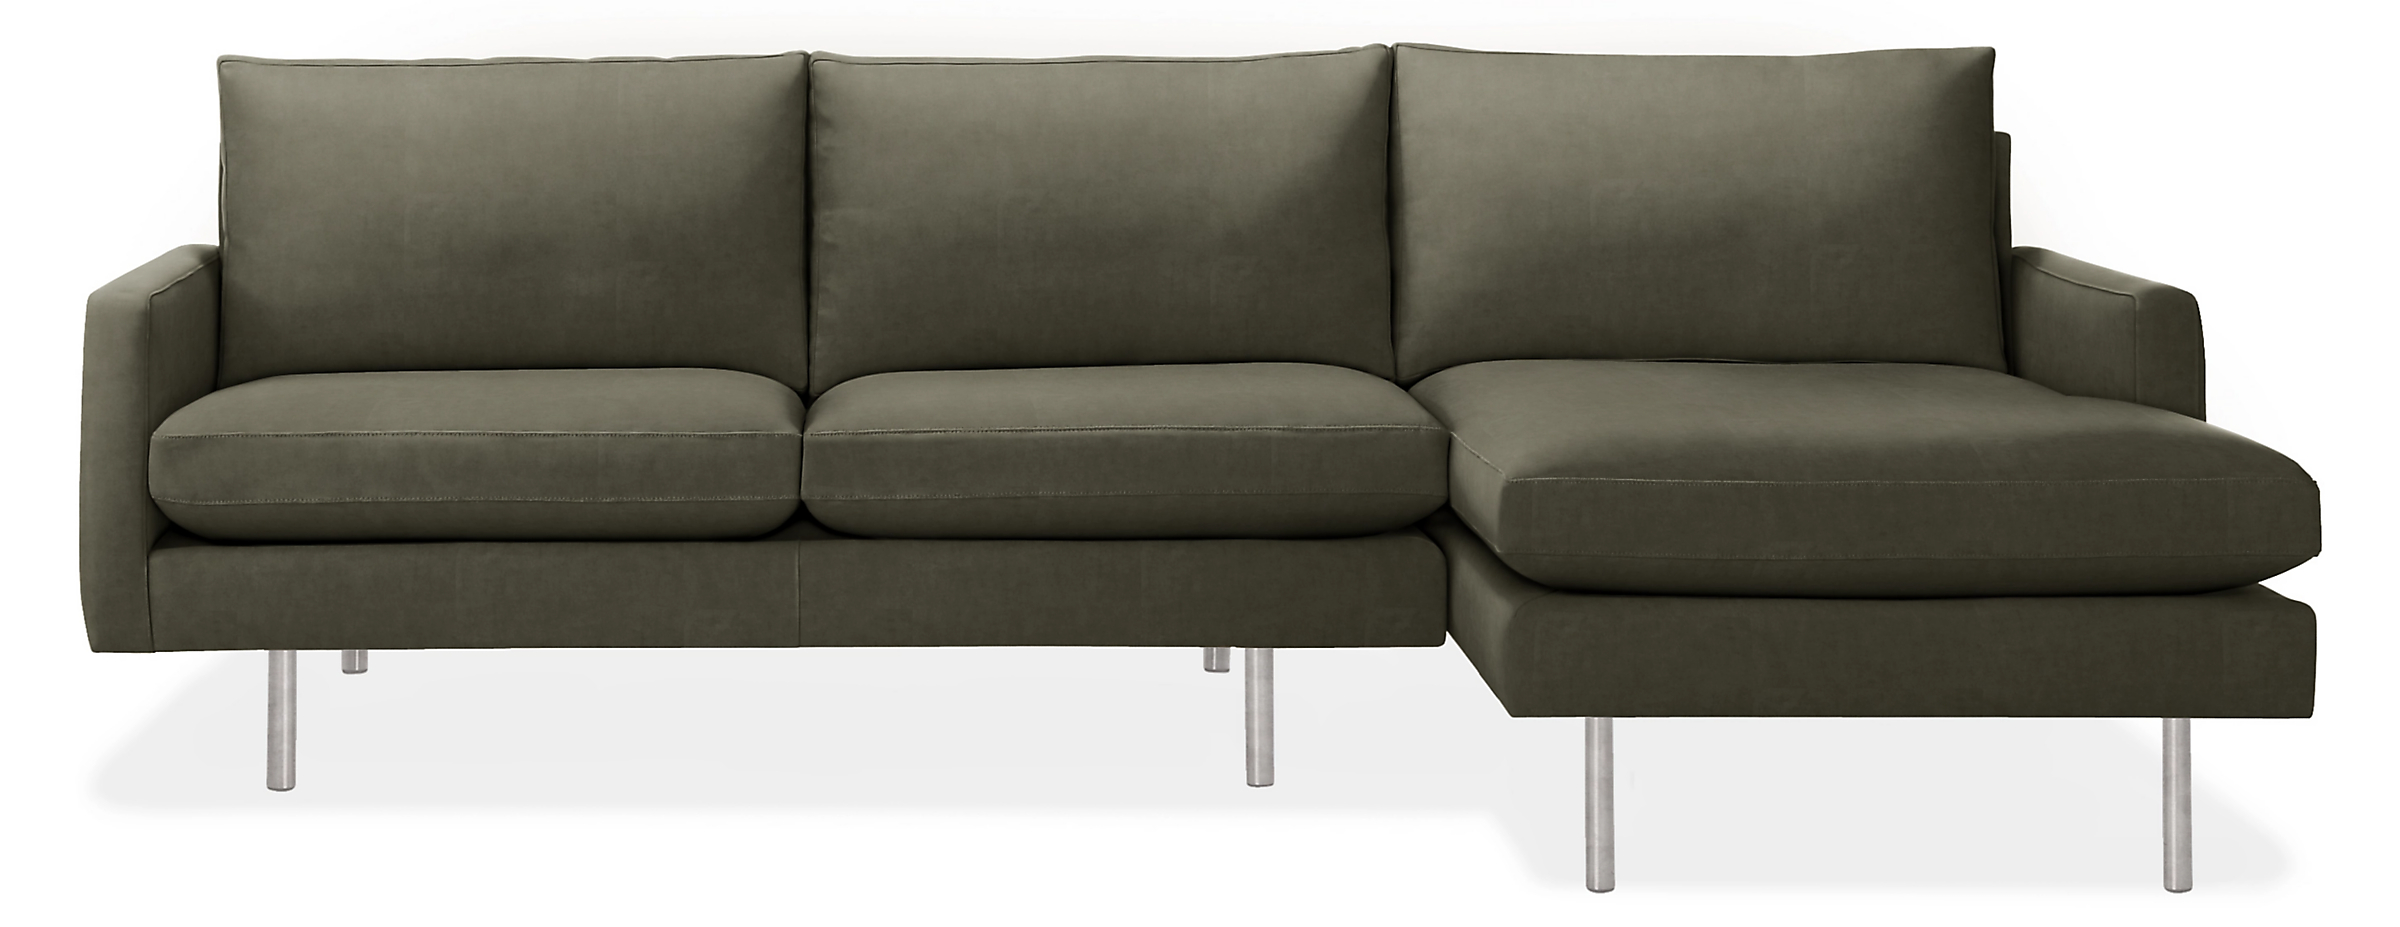 Jasper 104" Sofa with Right-Arm Chaise in View Pewter with Stainless Steel Legs